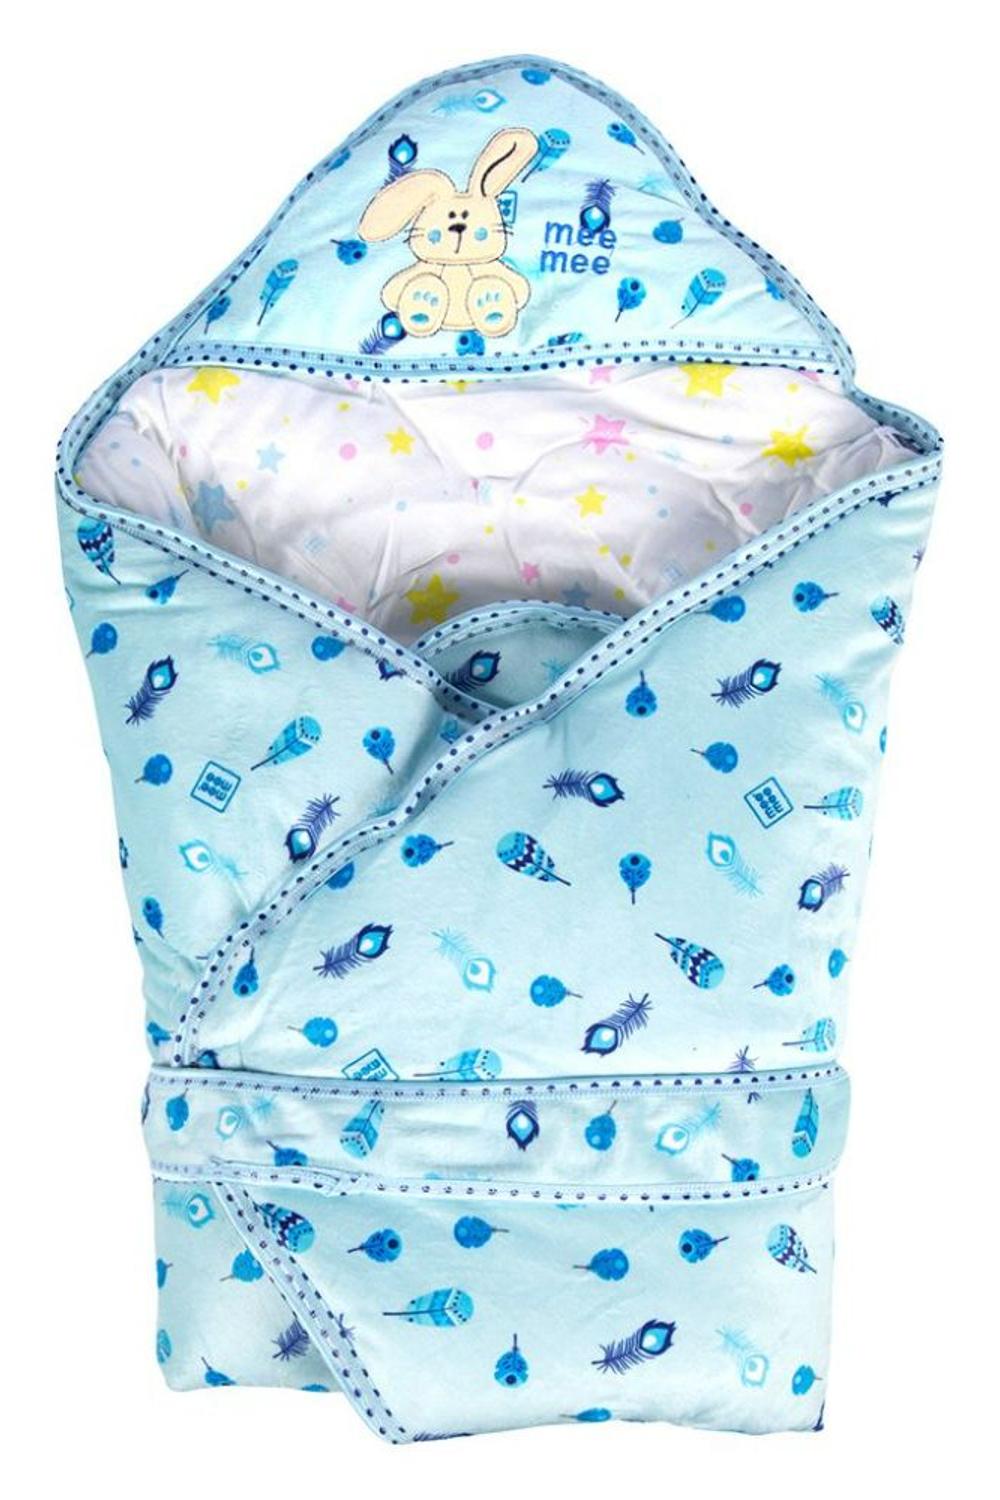 Mee Mee Baby Warm and Soft Swaddle Wrapper Hooded with Hood Double Layer for Newborn Babies (Blue)